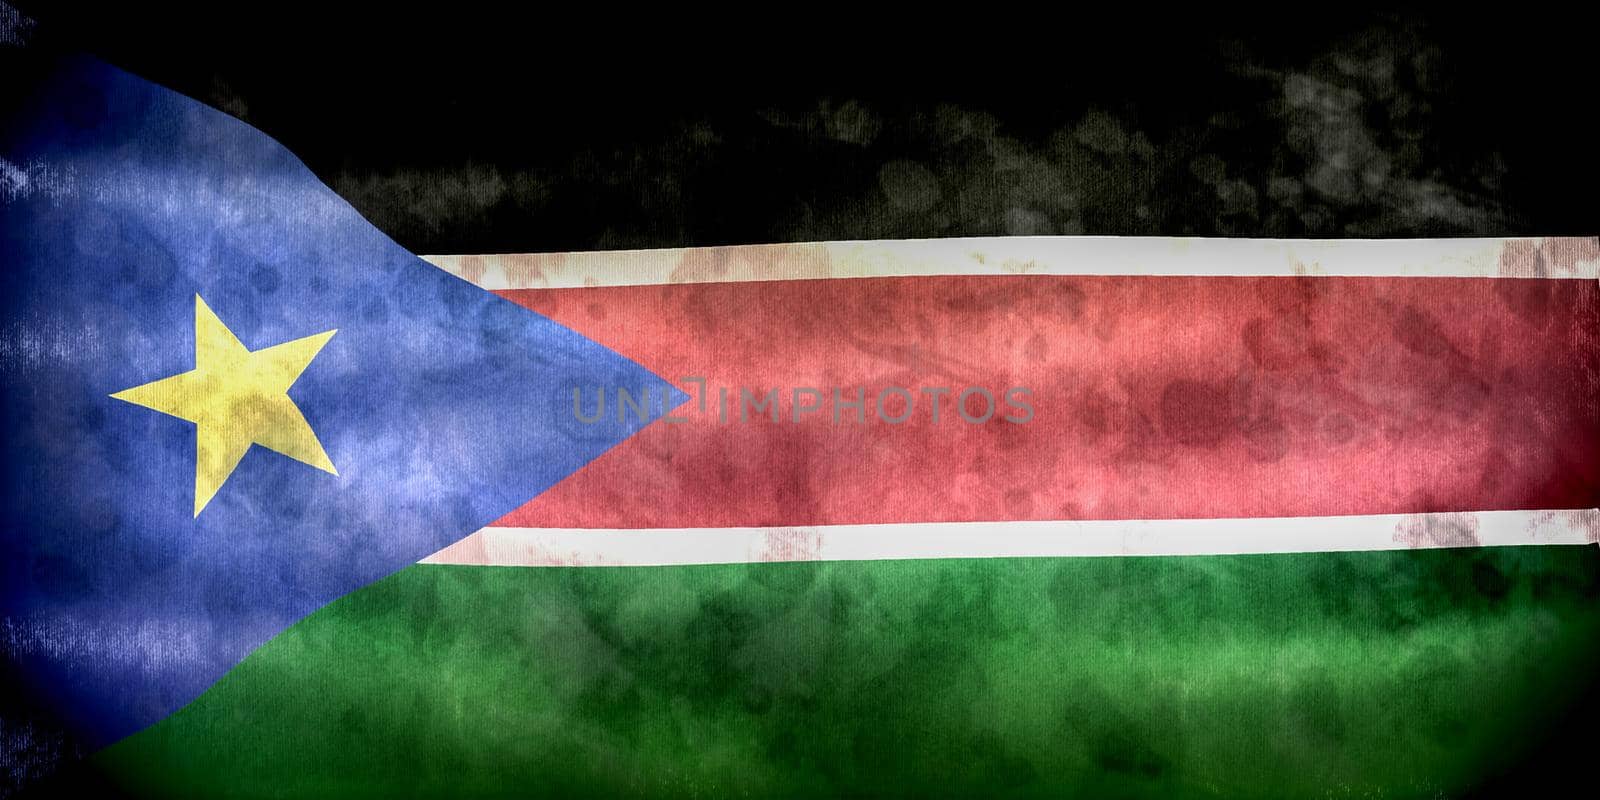 3D-Illustration of a South Sudan flag - realistic waving fabric flag by MP_foto71